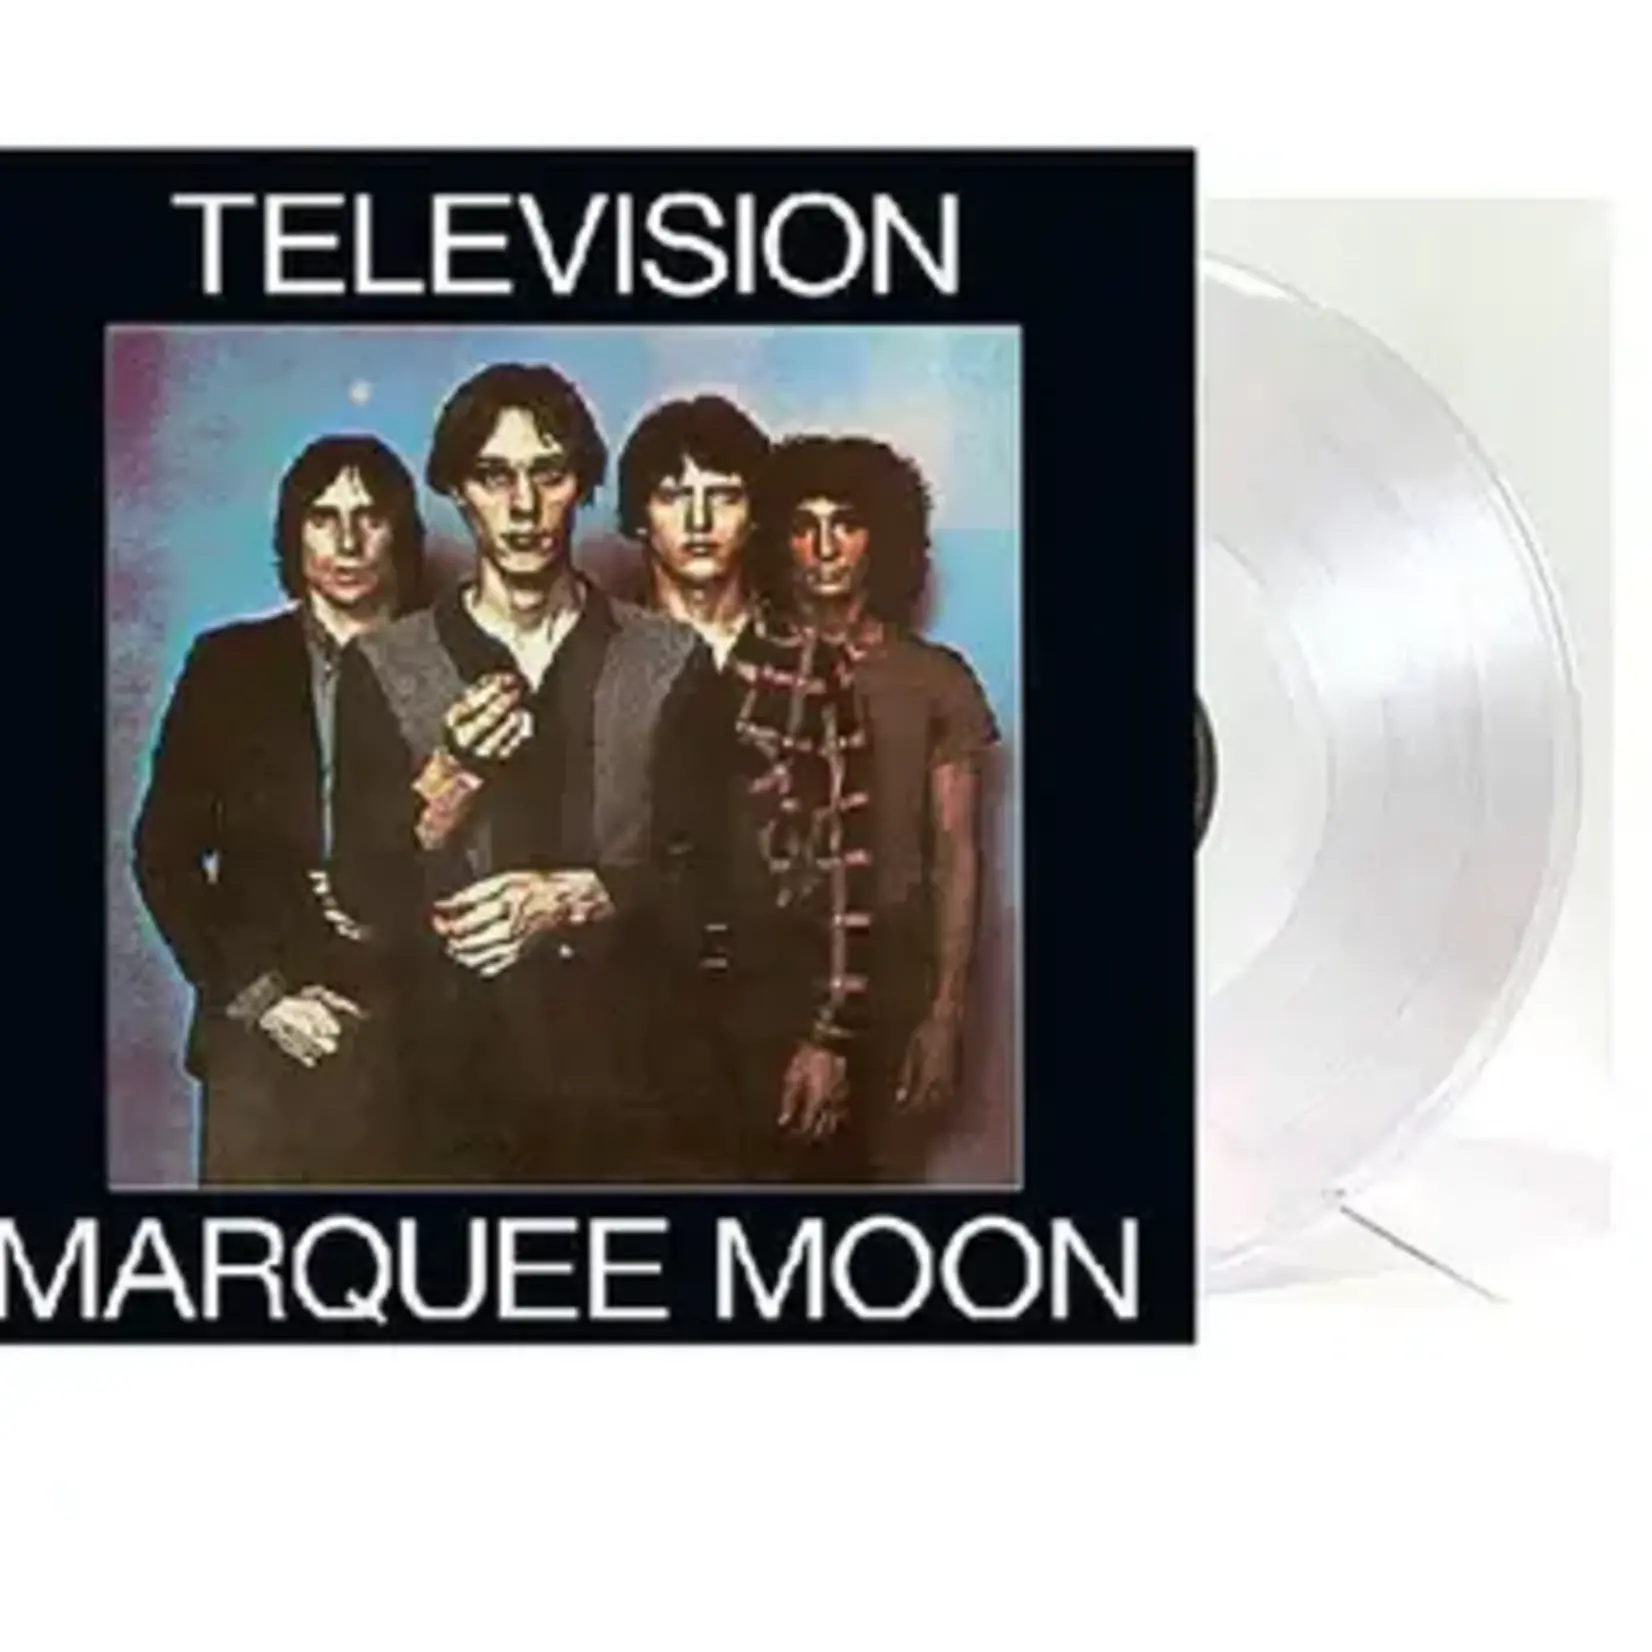 [New] Television - Marquee Moon (ultra clear, indie exclusive)